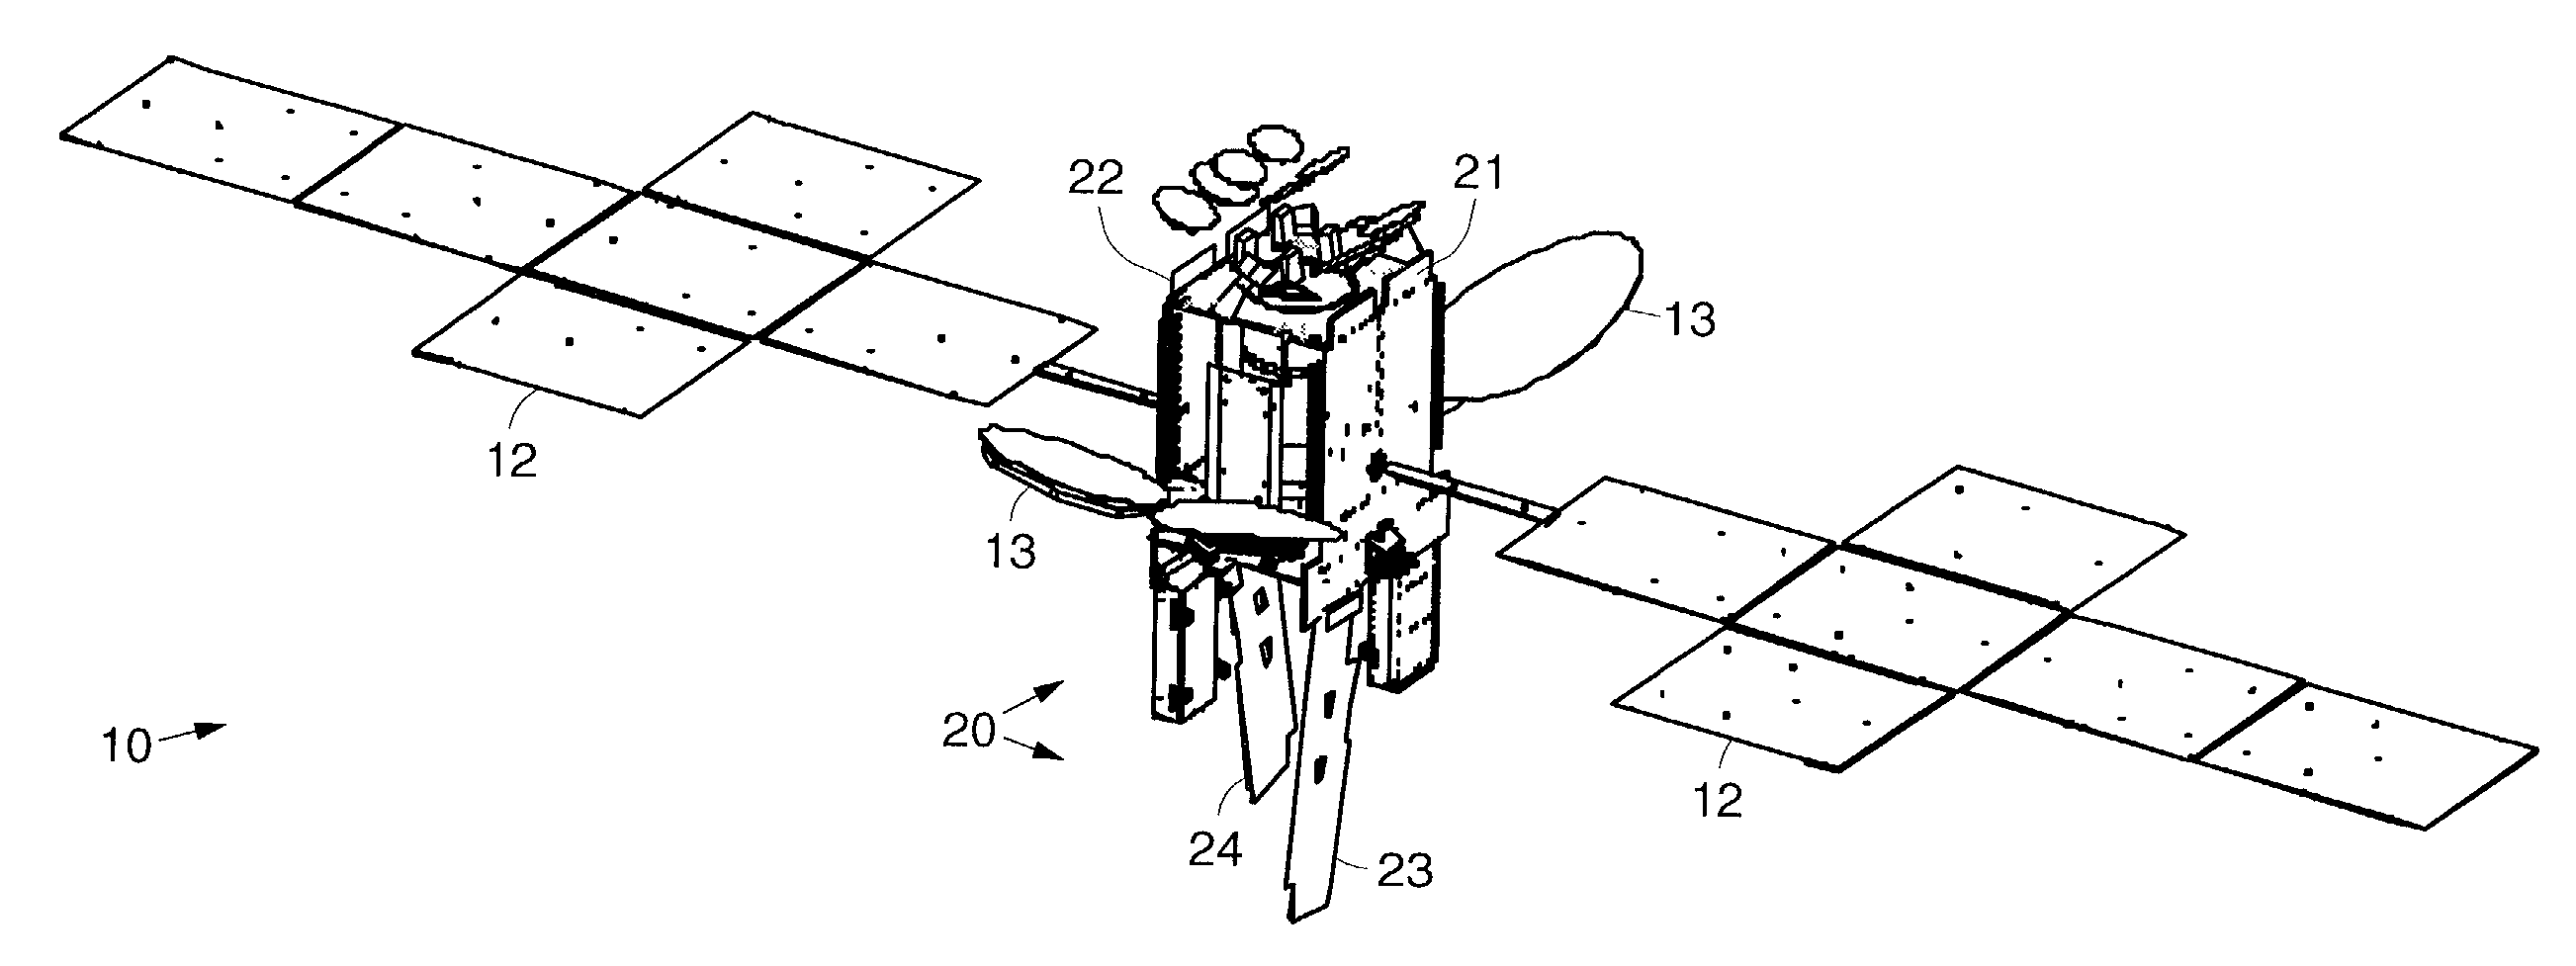 Two-sided deployable thermal radiator system and method